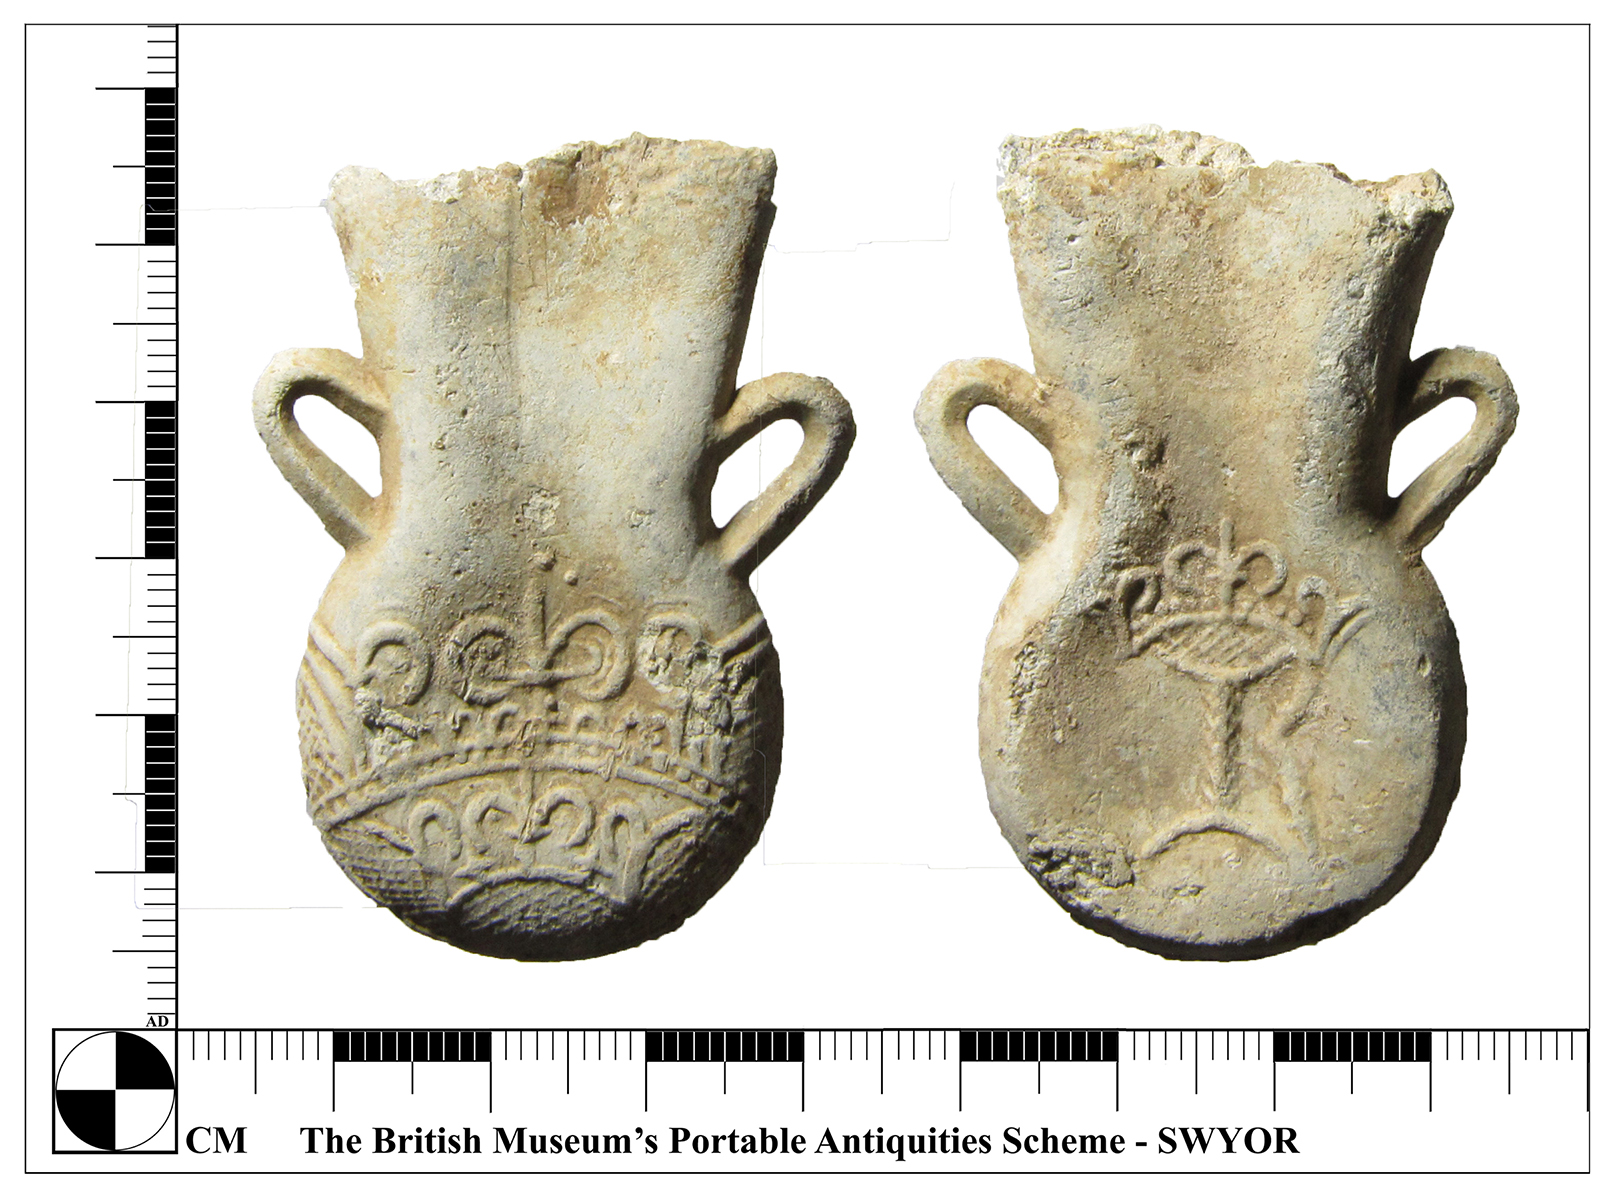 Pilgrim ampulla for holding holy water. (Photo courtesy of the British Museum's Portable Antiquities Scheme)